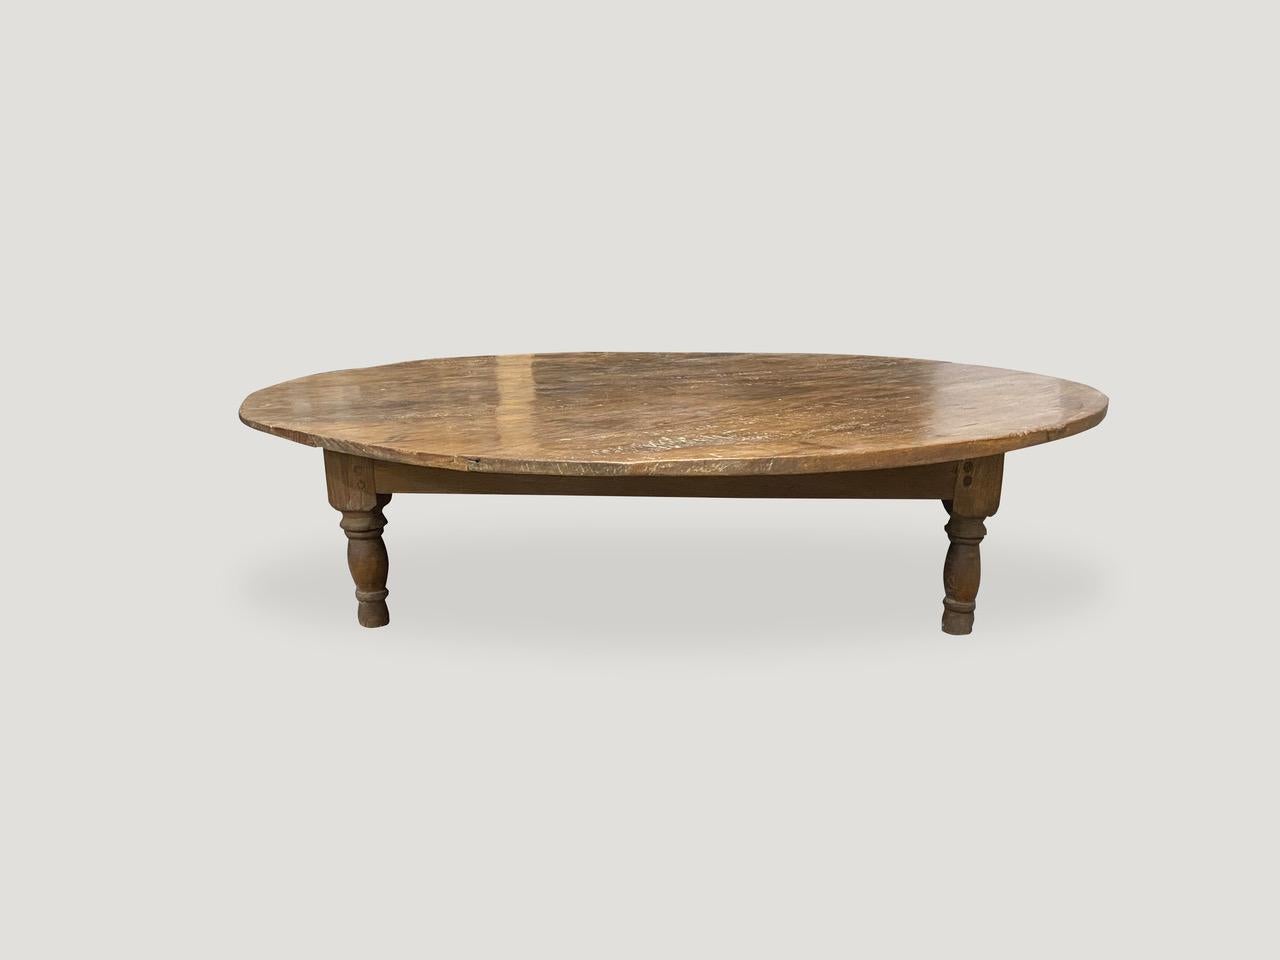 Lovely patina on this reclaimed teak wood antique coffee table with four hand carved legs. Floating on a minimalist base. Great for inside or outside use and light enough to bring inside during the harsh winters.

This coffee table was sourced in